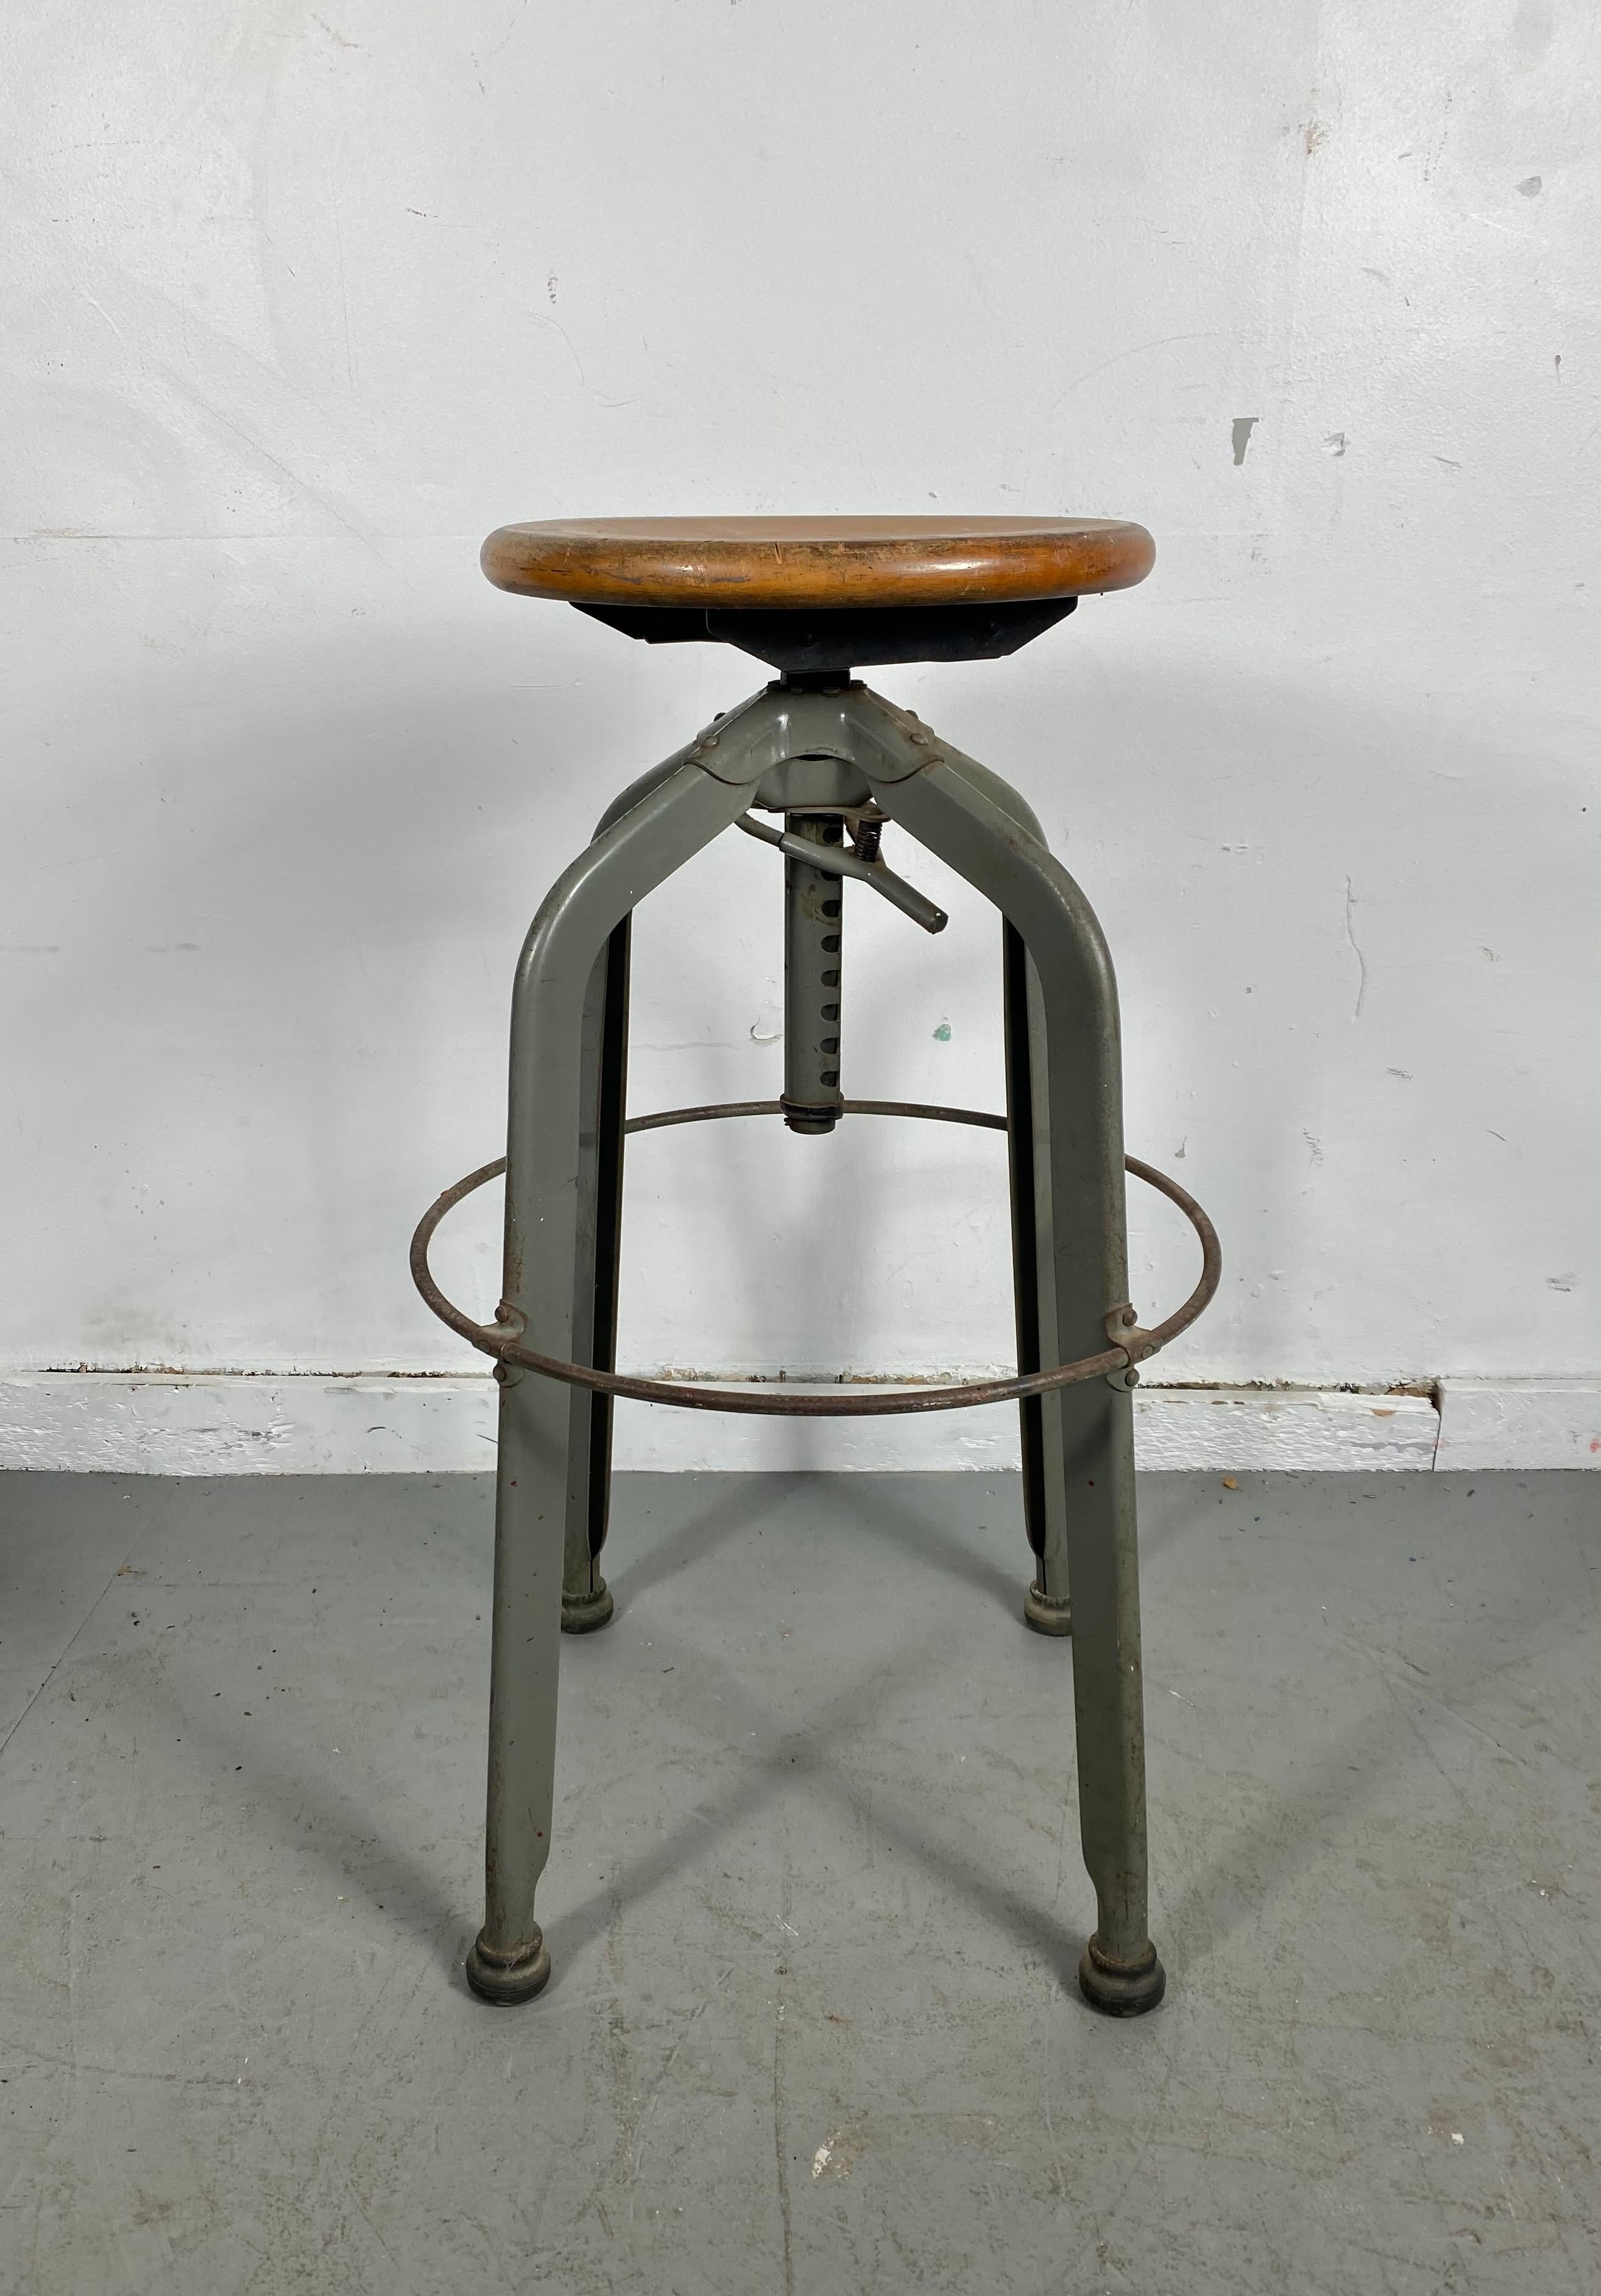 Unusual industrial Toledo drafting / counter /bar stool, adjustable height, from 30